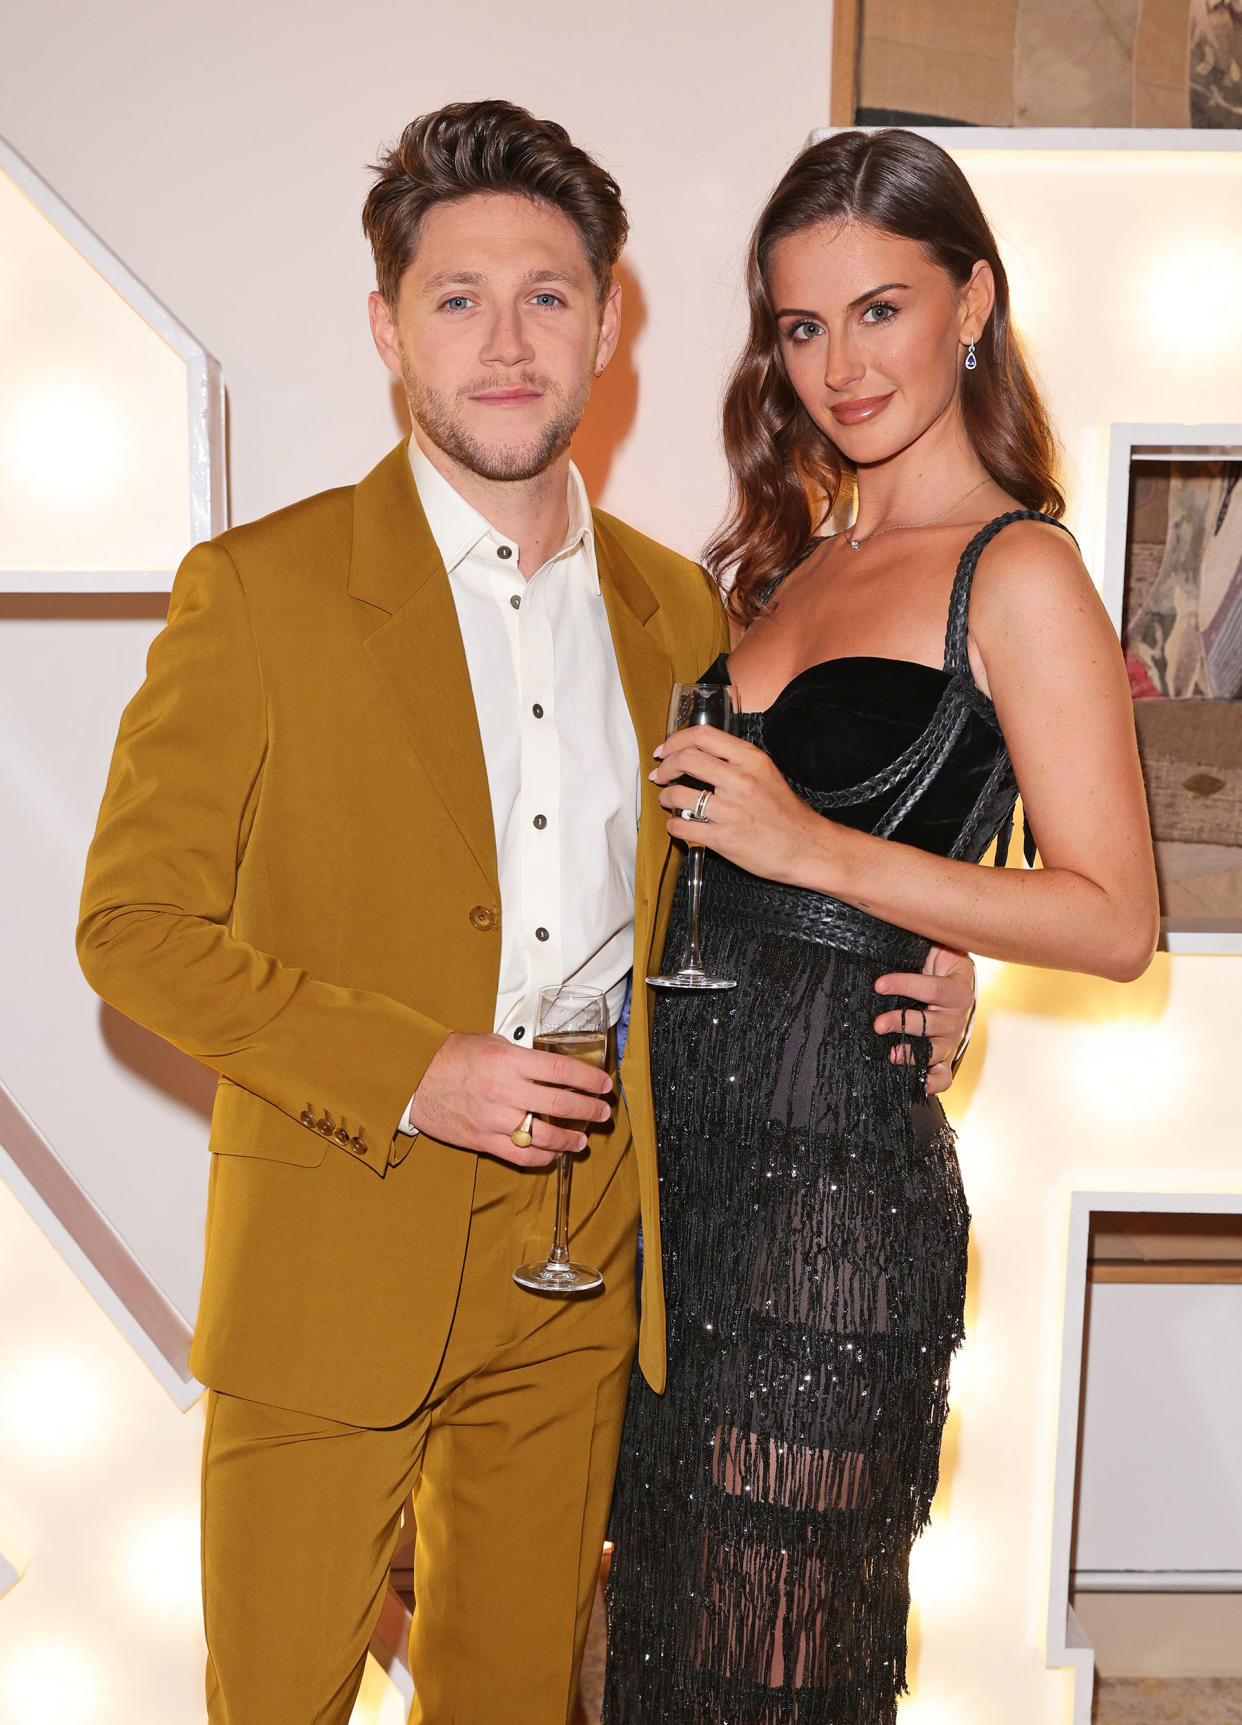 Niall Horan and Mia Woolley (David M. Benett / Getty Images)